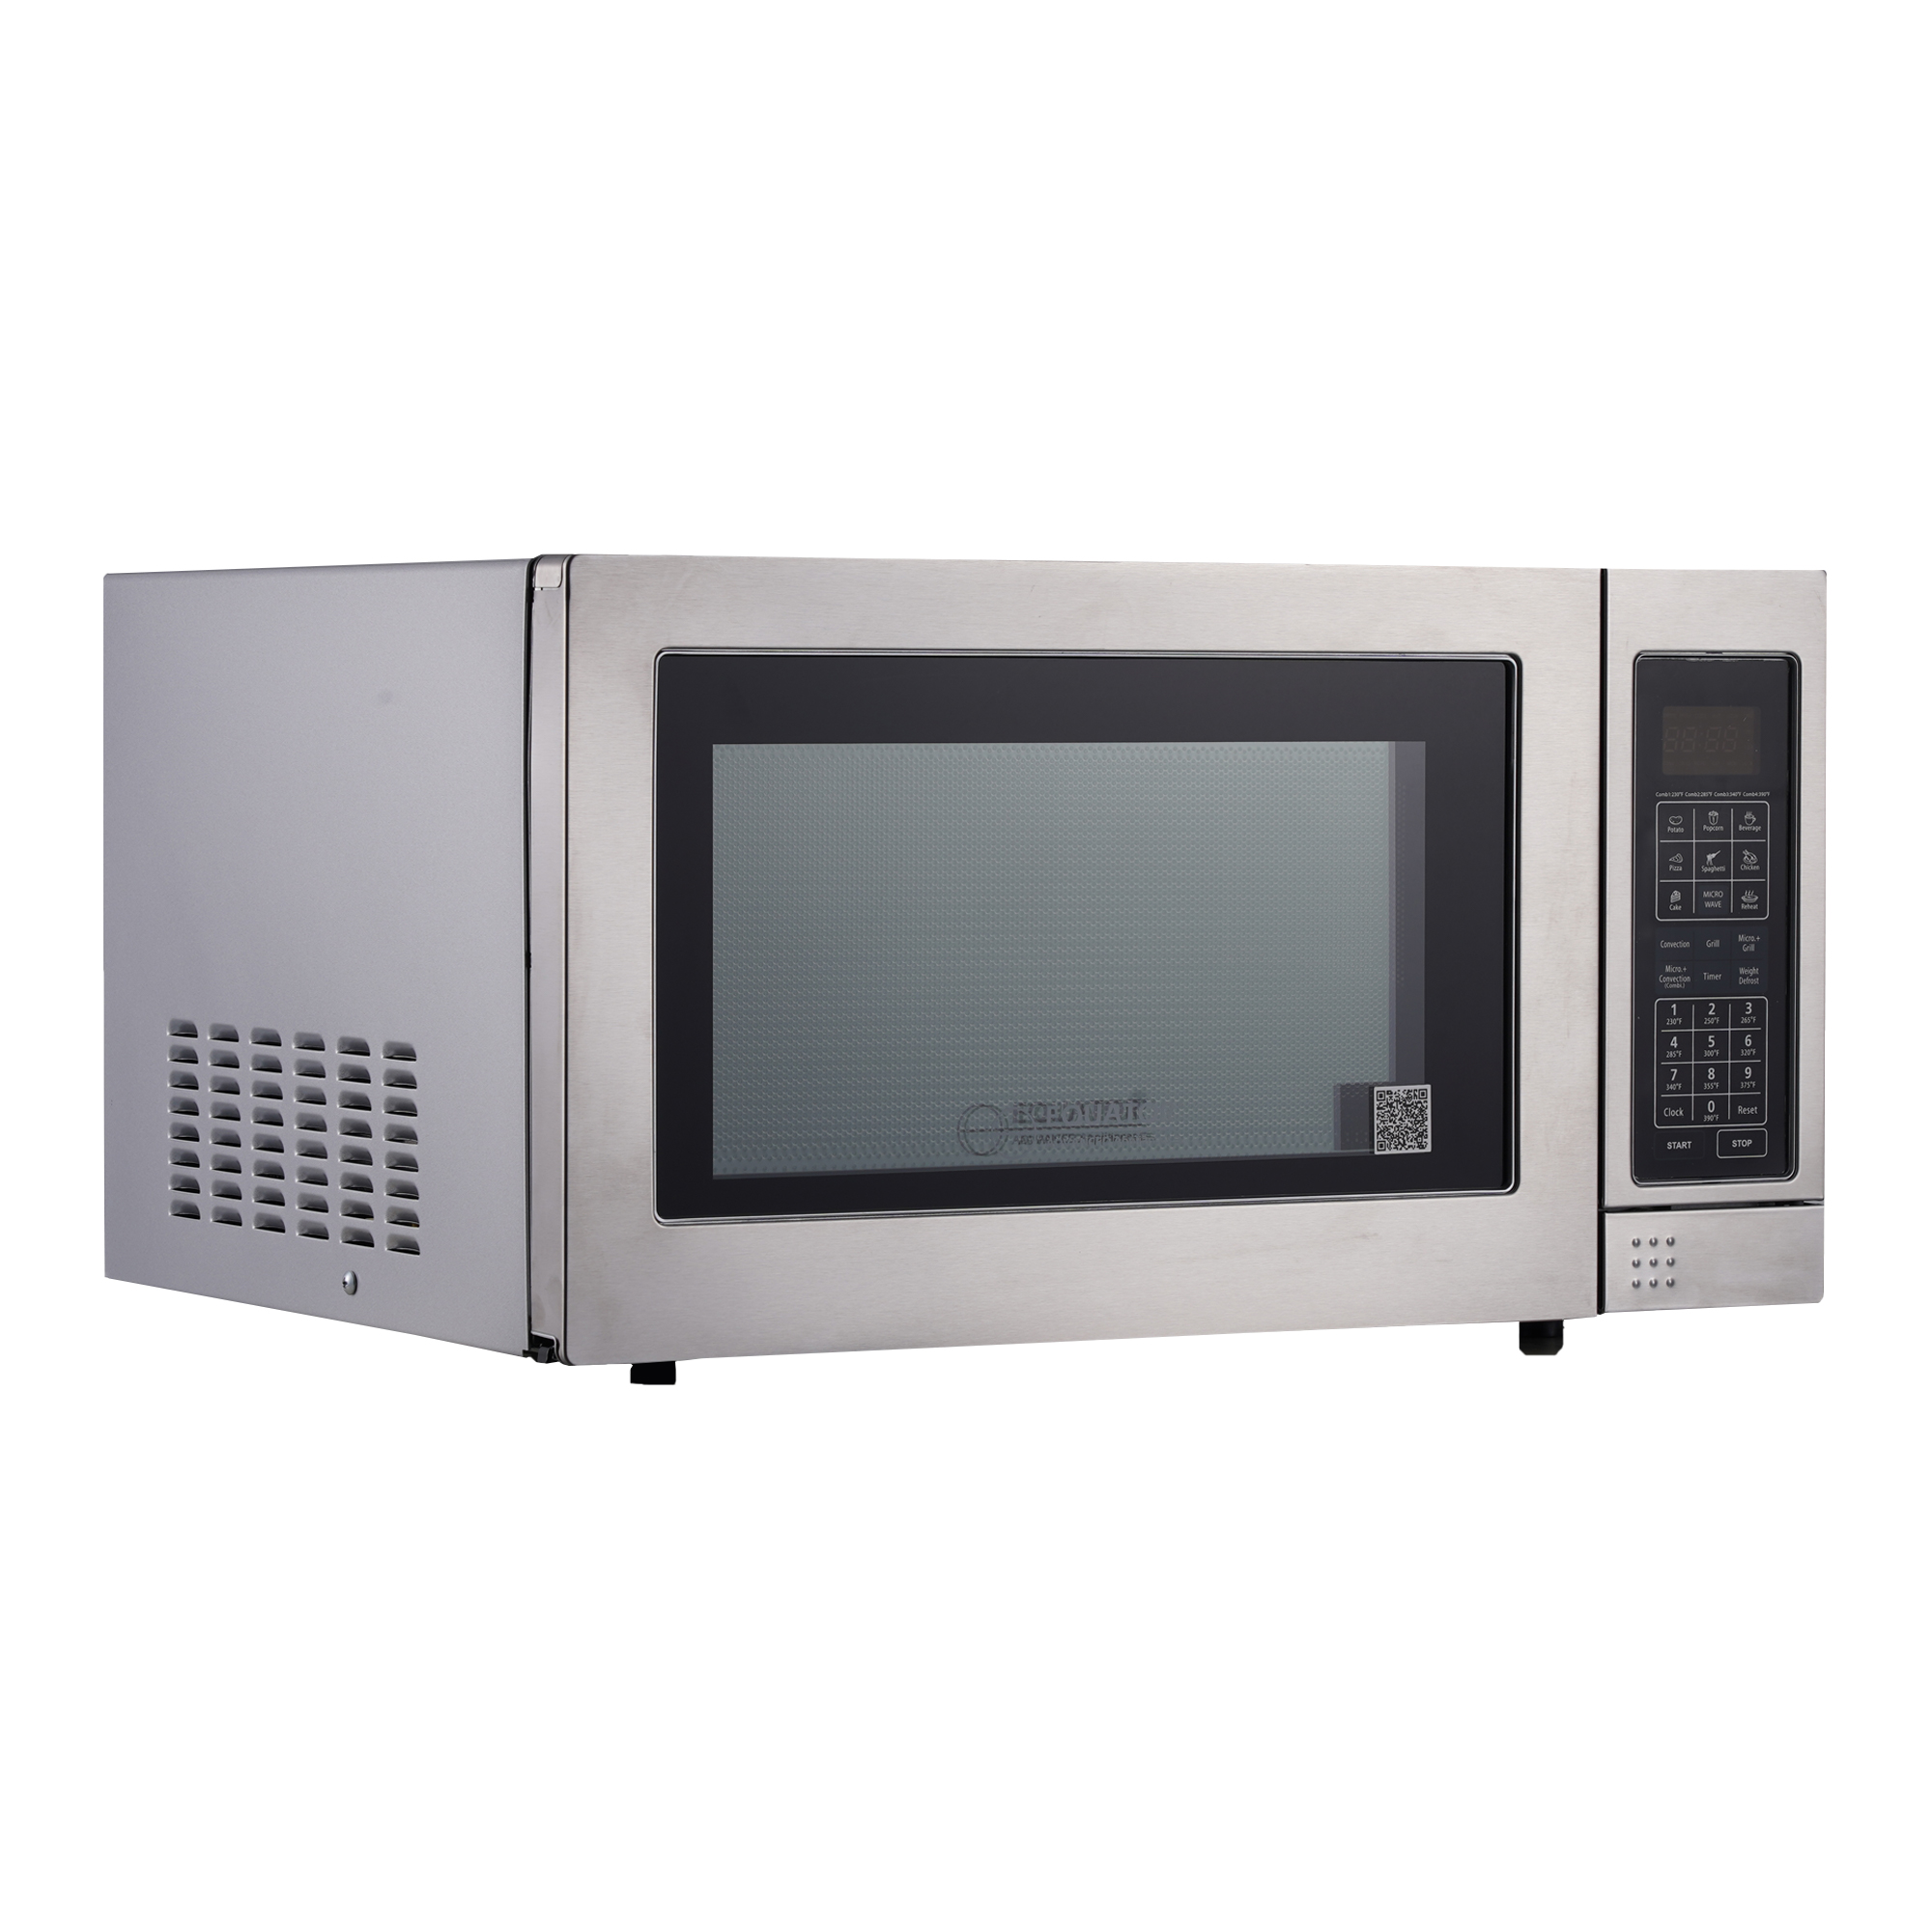 3-in-1 Microwave + Grill + Convertion Oven